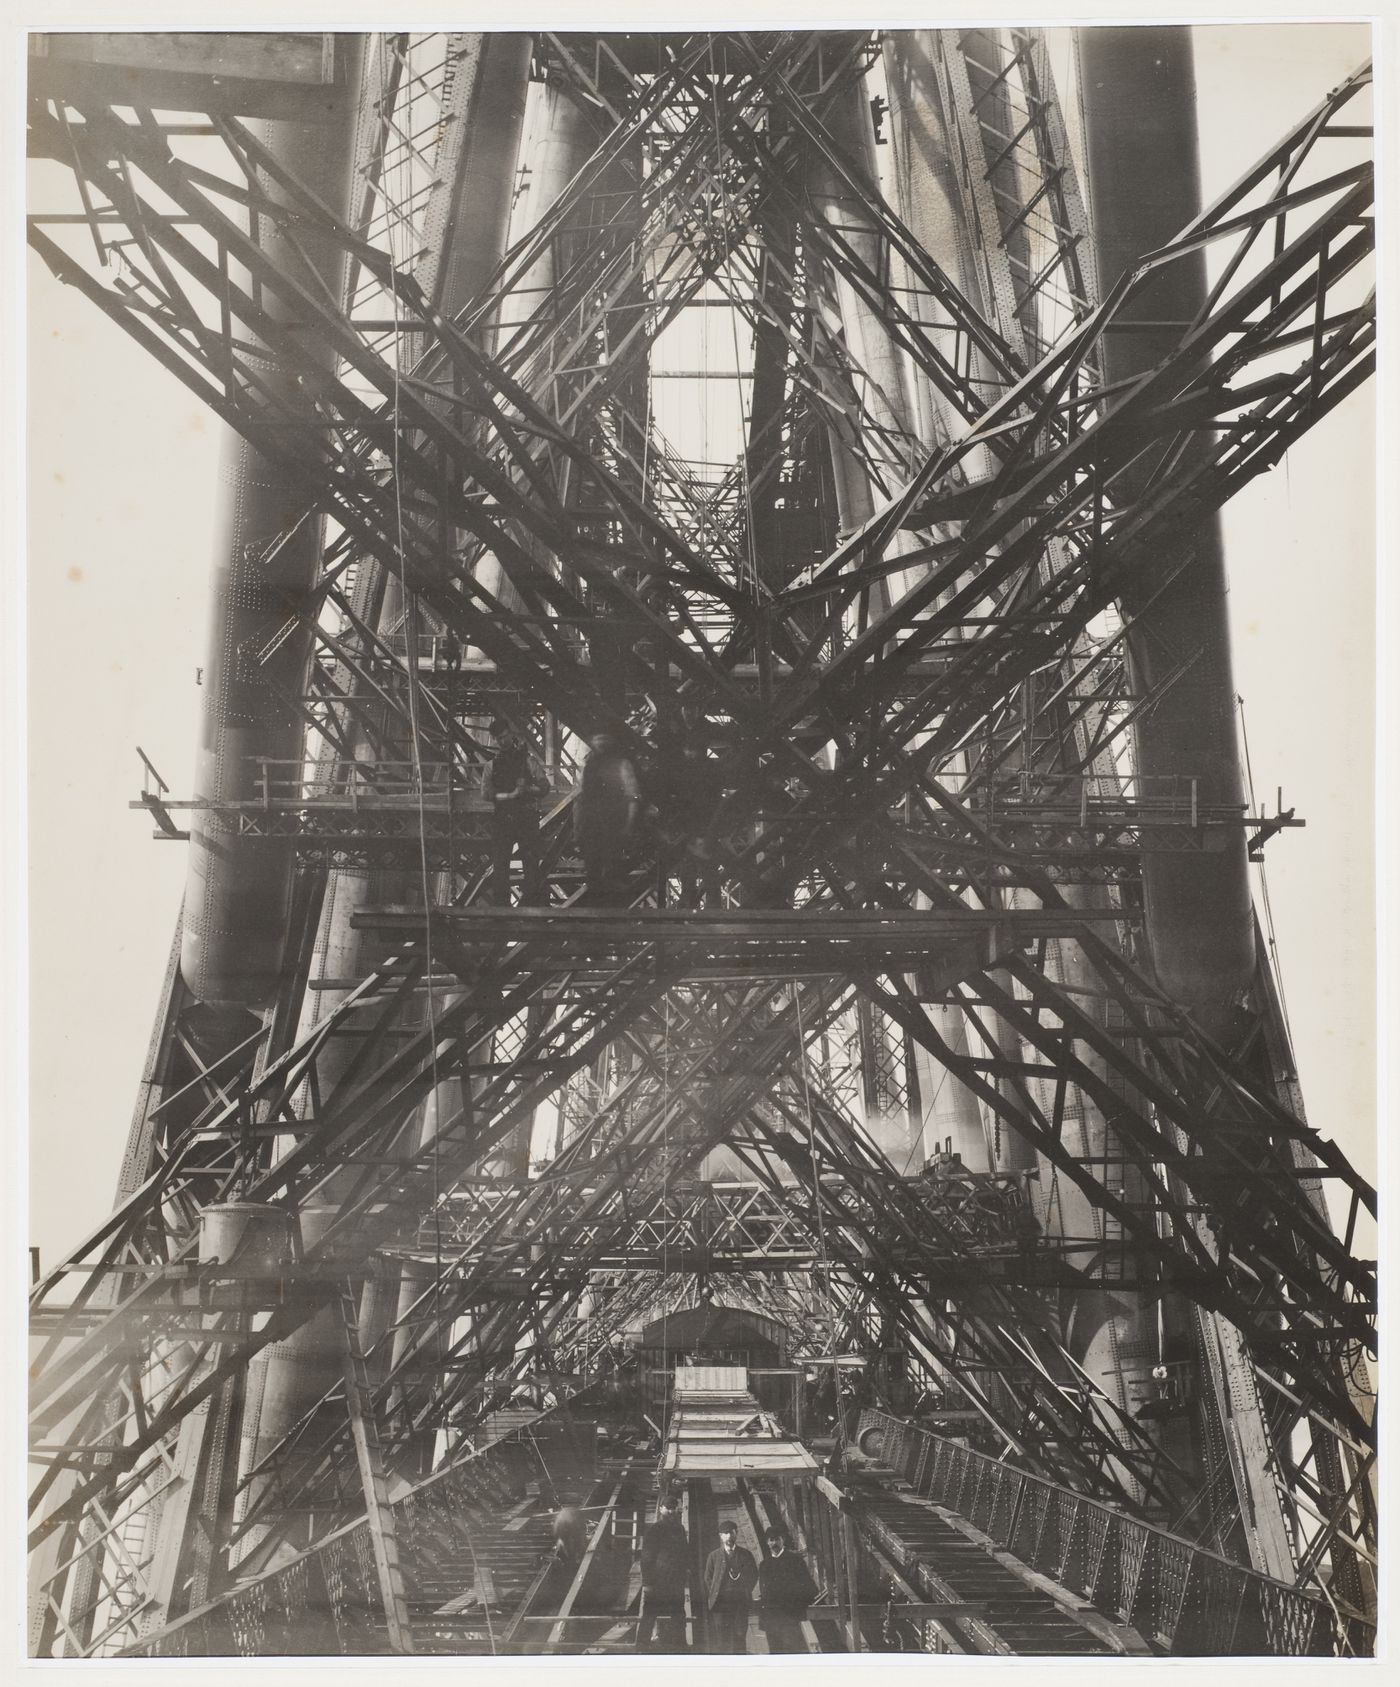 View of the Forth Bridge under construction, Firth of Forth, Scotland